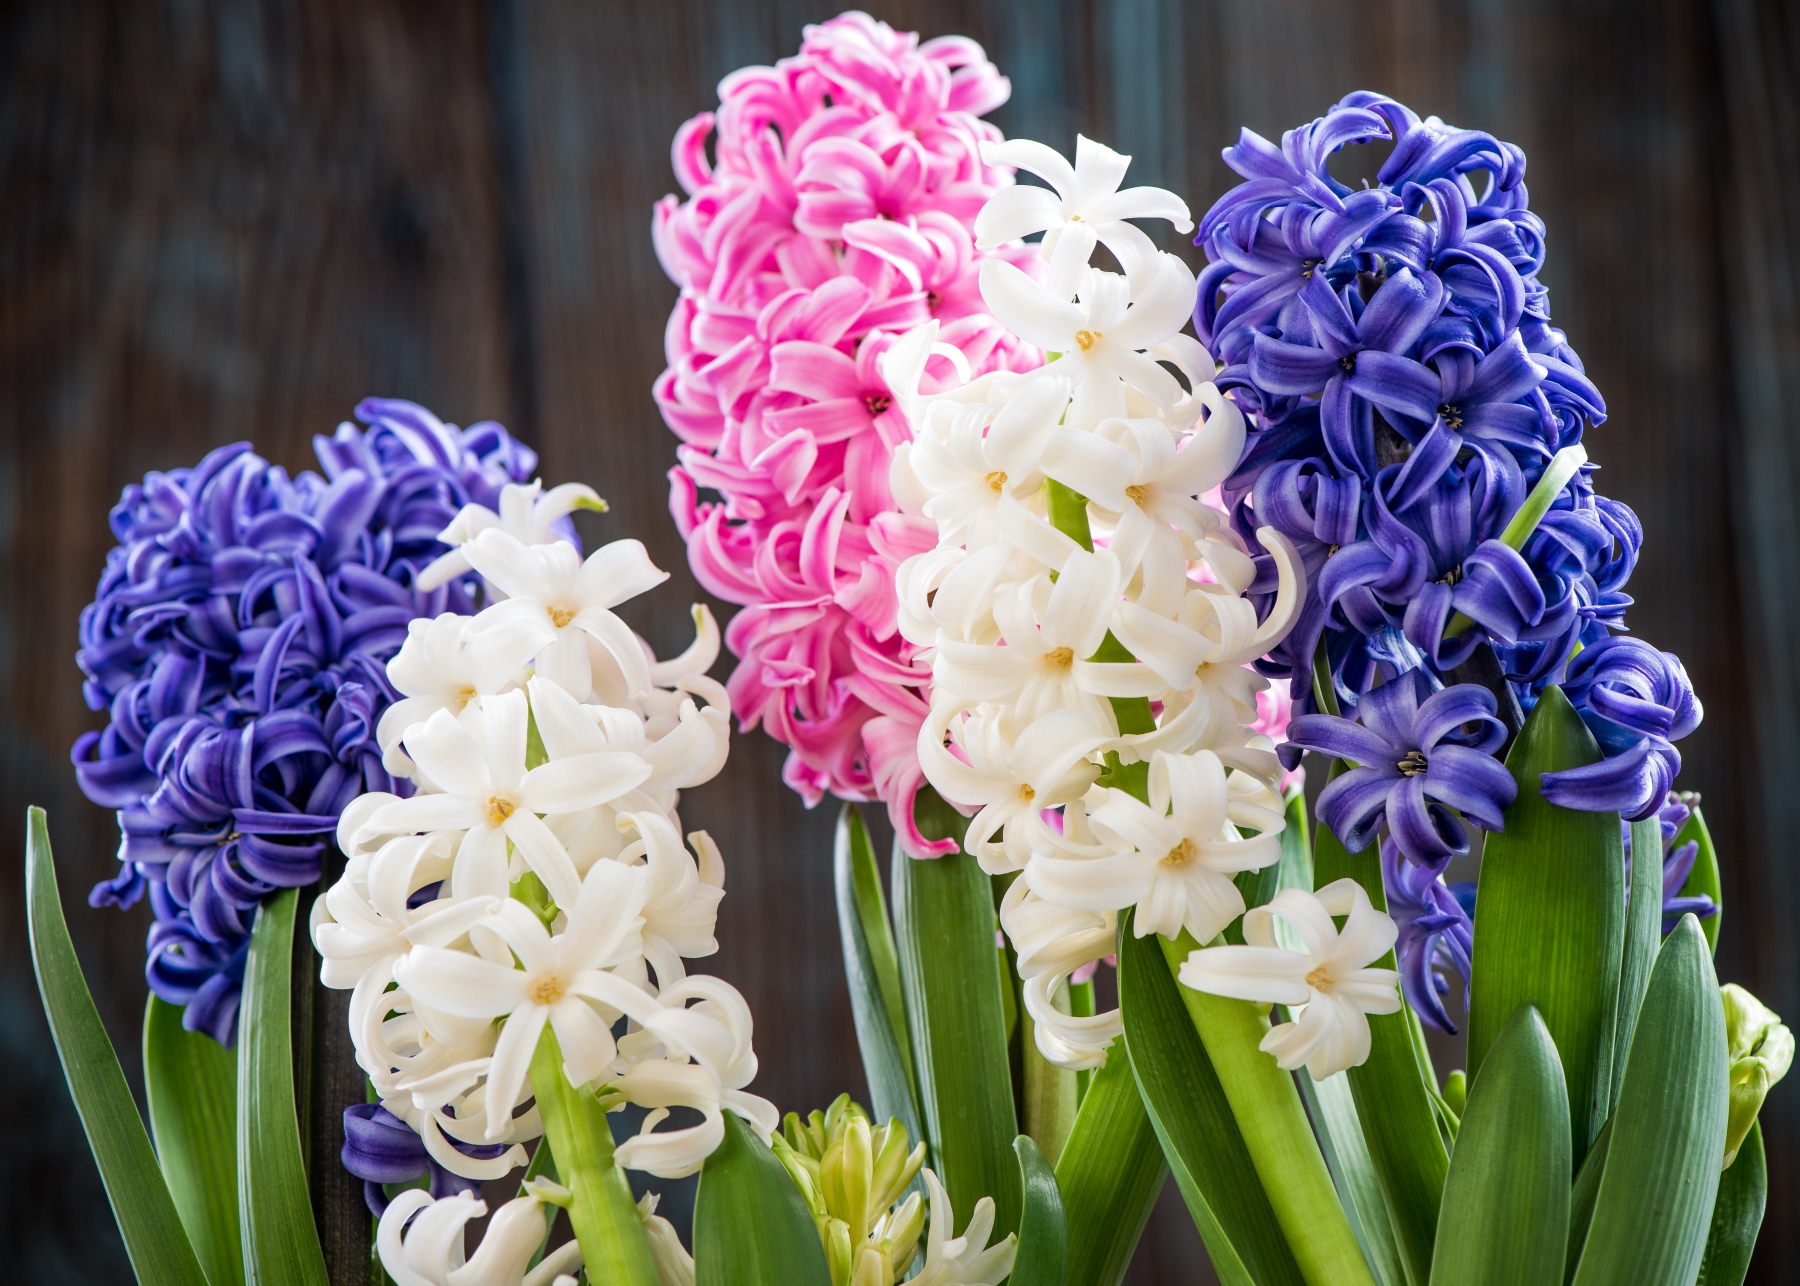 Hyacinths Planting And Caring For Hyacinth Flowers The Old Farmer S Almanac